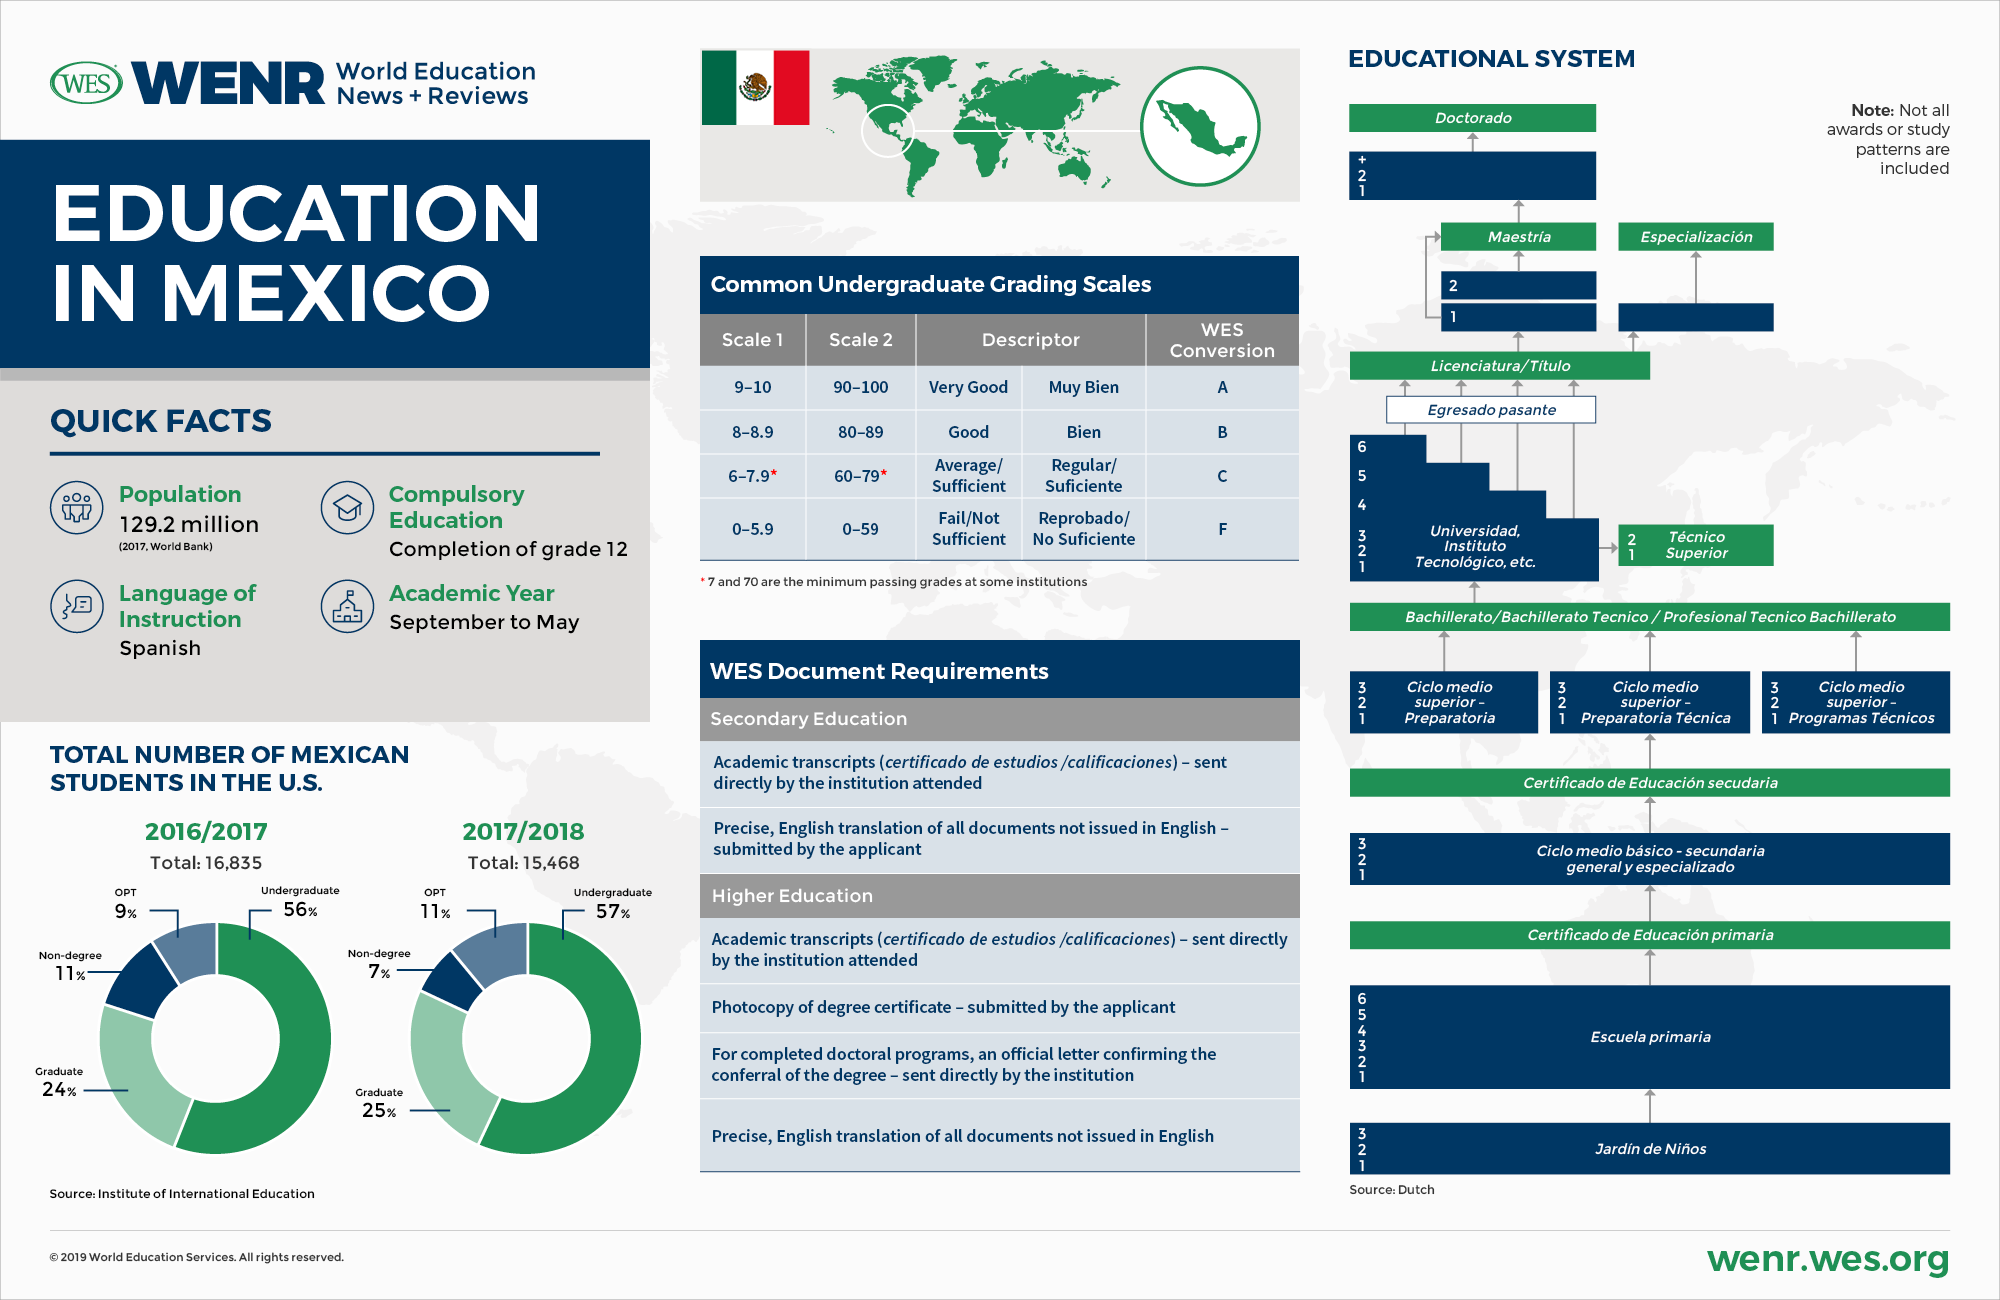 Education in Mexico infographic: quick facts about education in Mexico